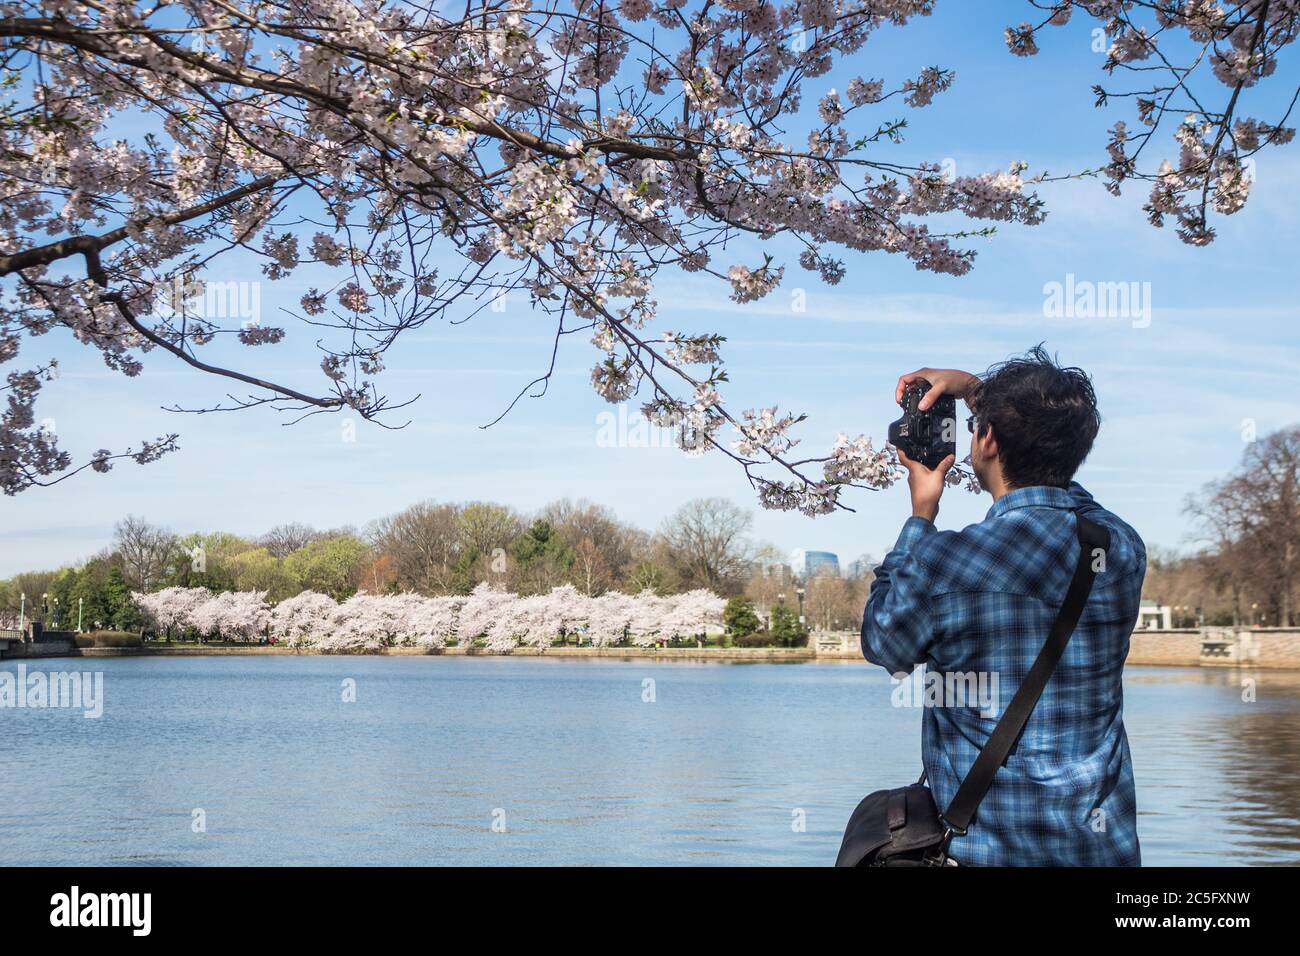 A young male photographer taking pictures of / photographing cherry blossoms / sakura along Potomac River, Washington, D.C., United States Stock Photo